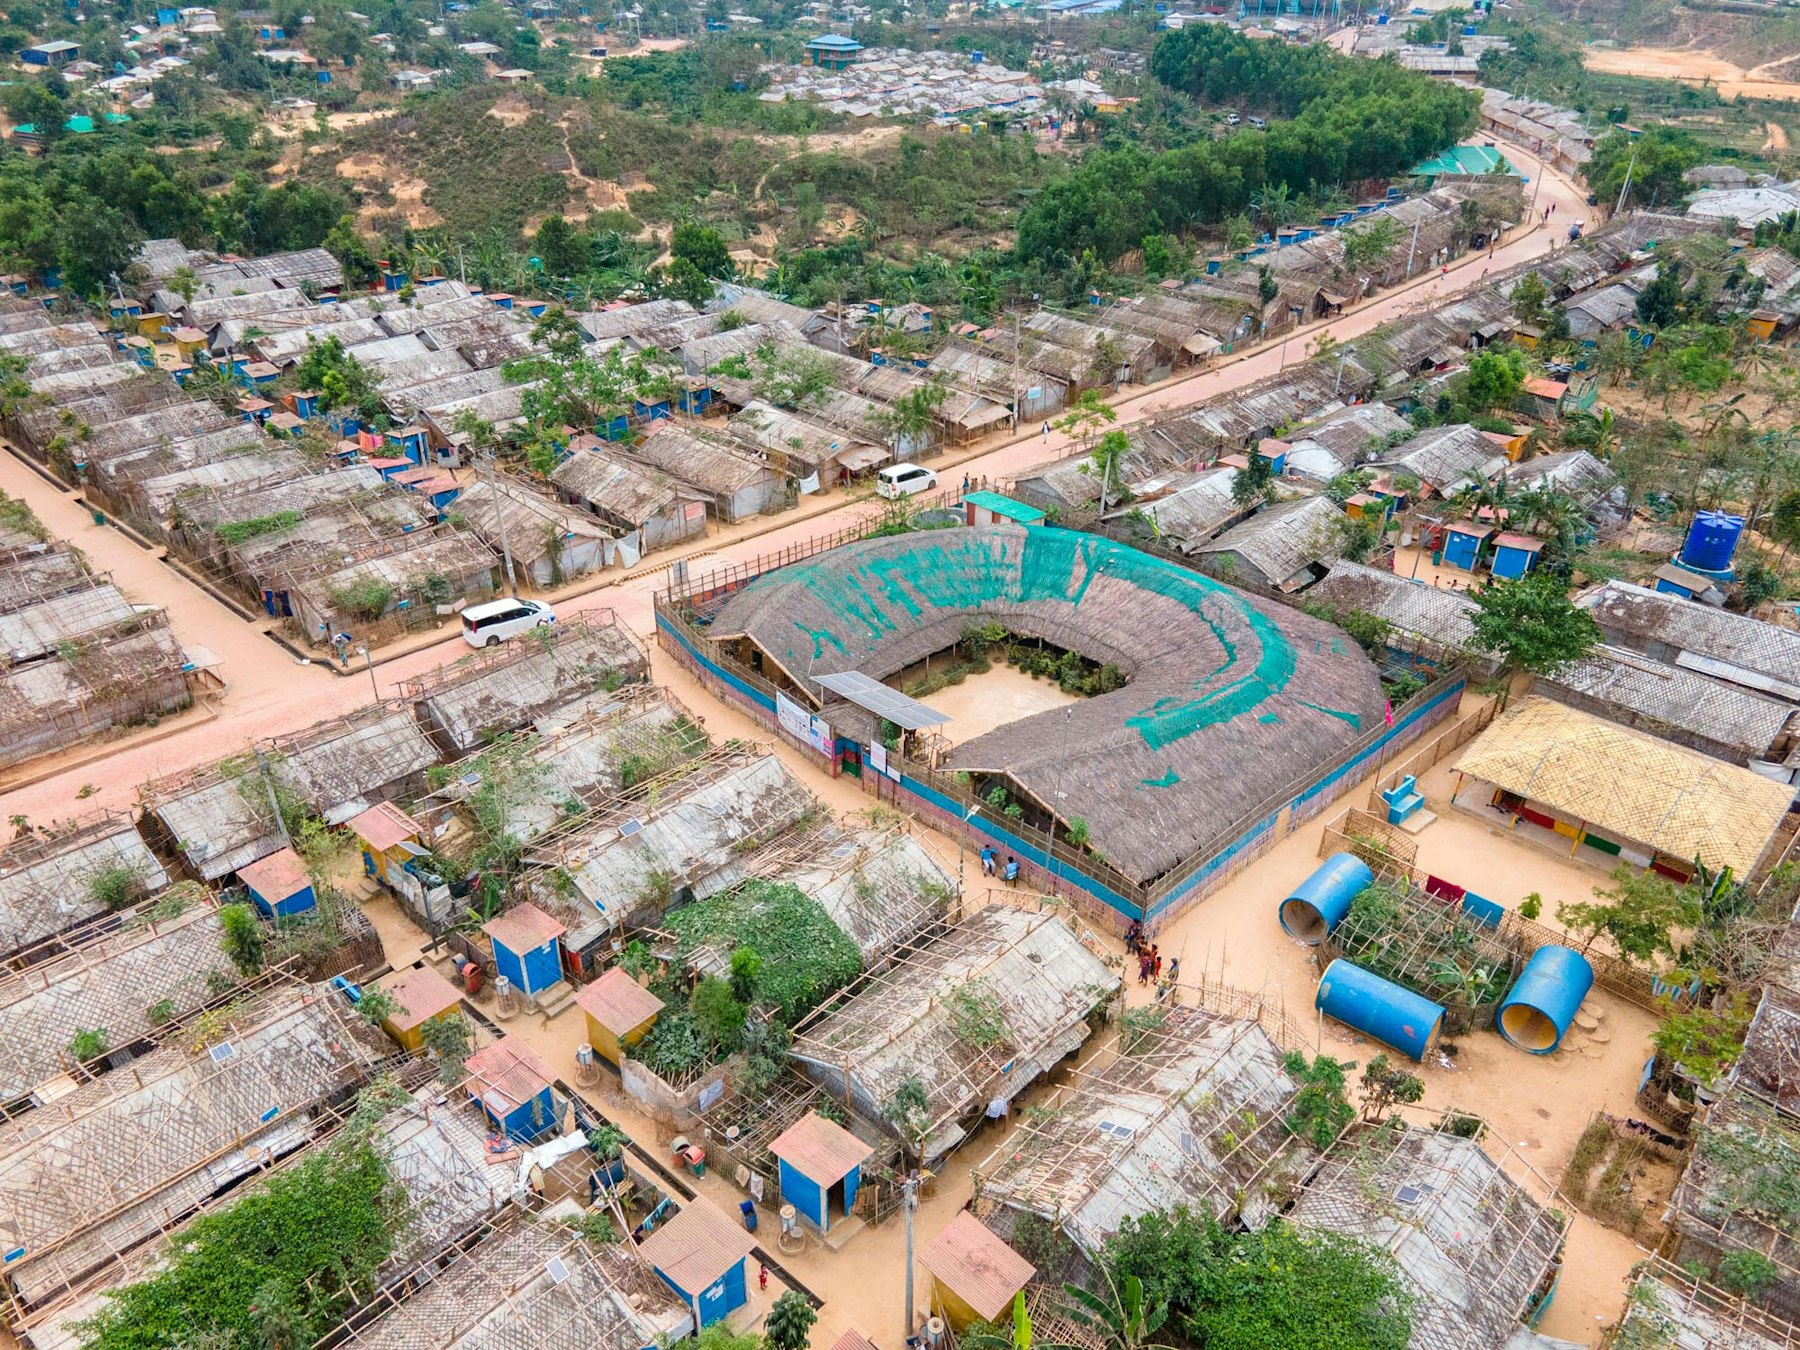 Aerial view of the Shantikhana Women Friendly Space in Camp 4ext. The construction started before the design was finalised, allowing the local Rohingya workers to express their artisanal skills and artistic freedom. | Aga Khan Trust for Culture / Asif Salman (photographer)